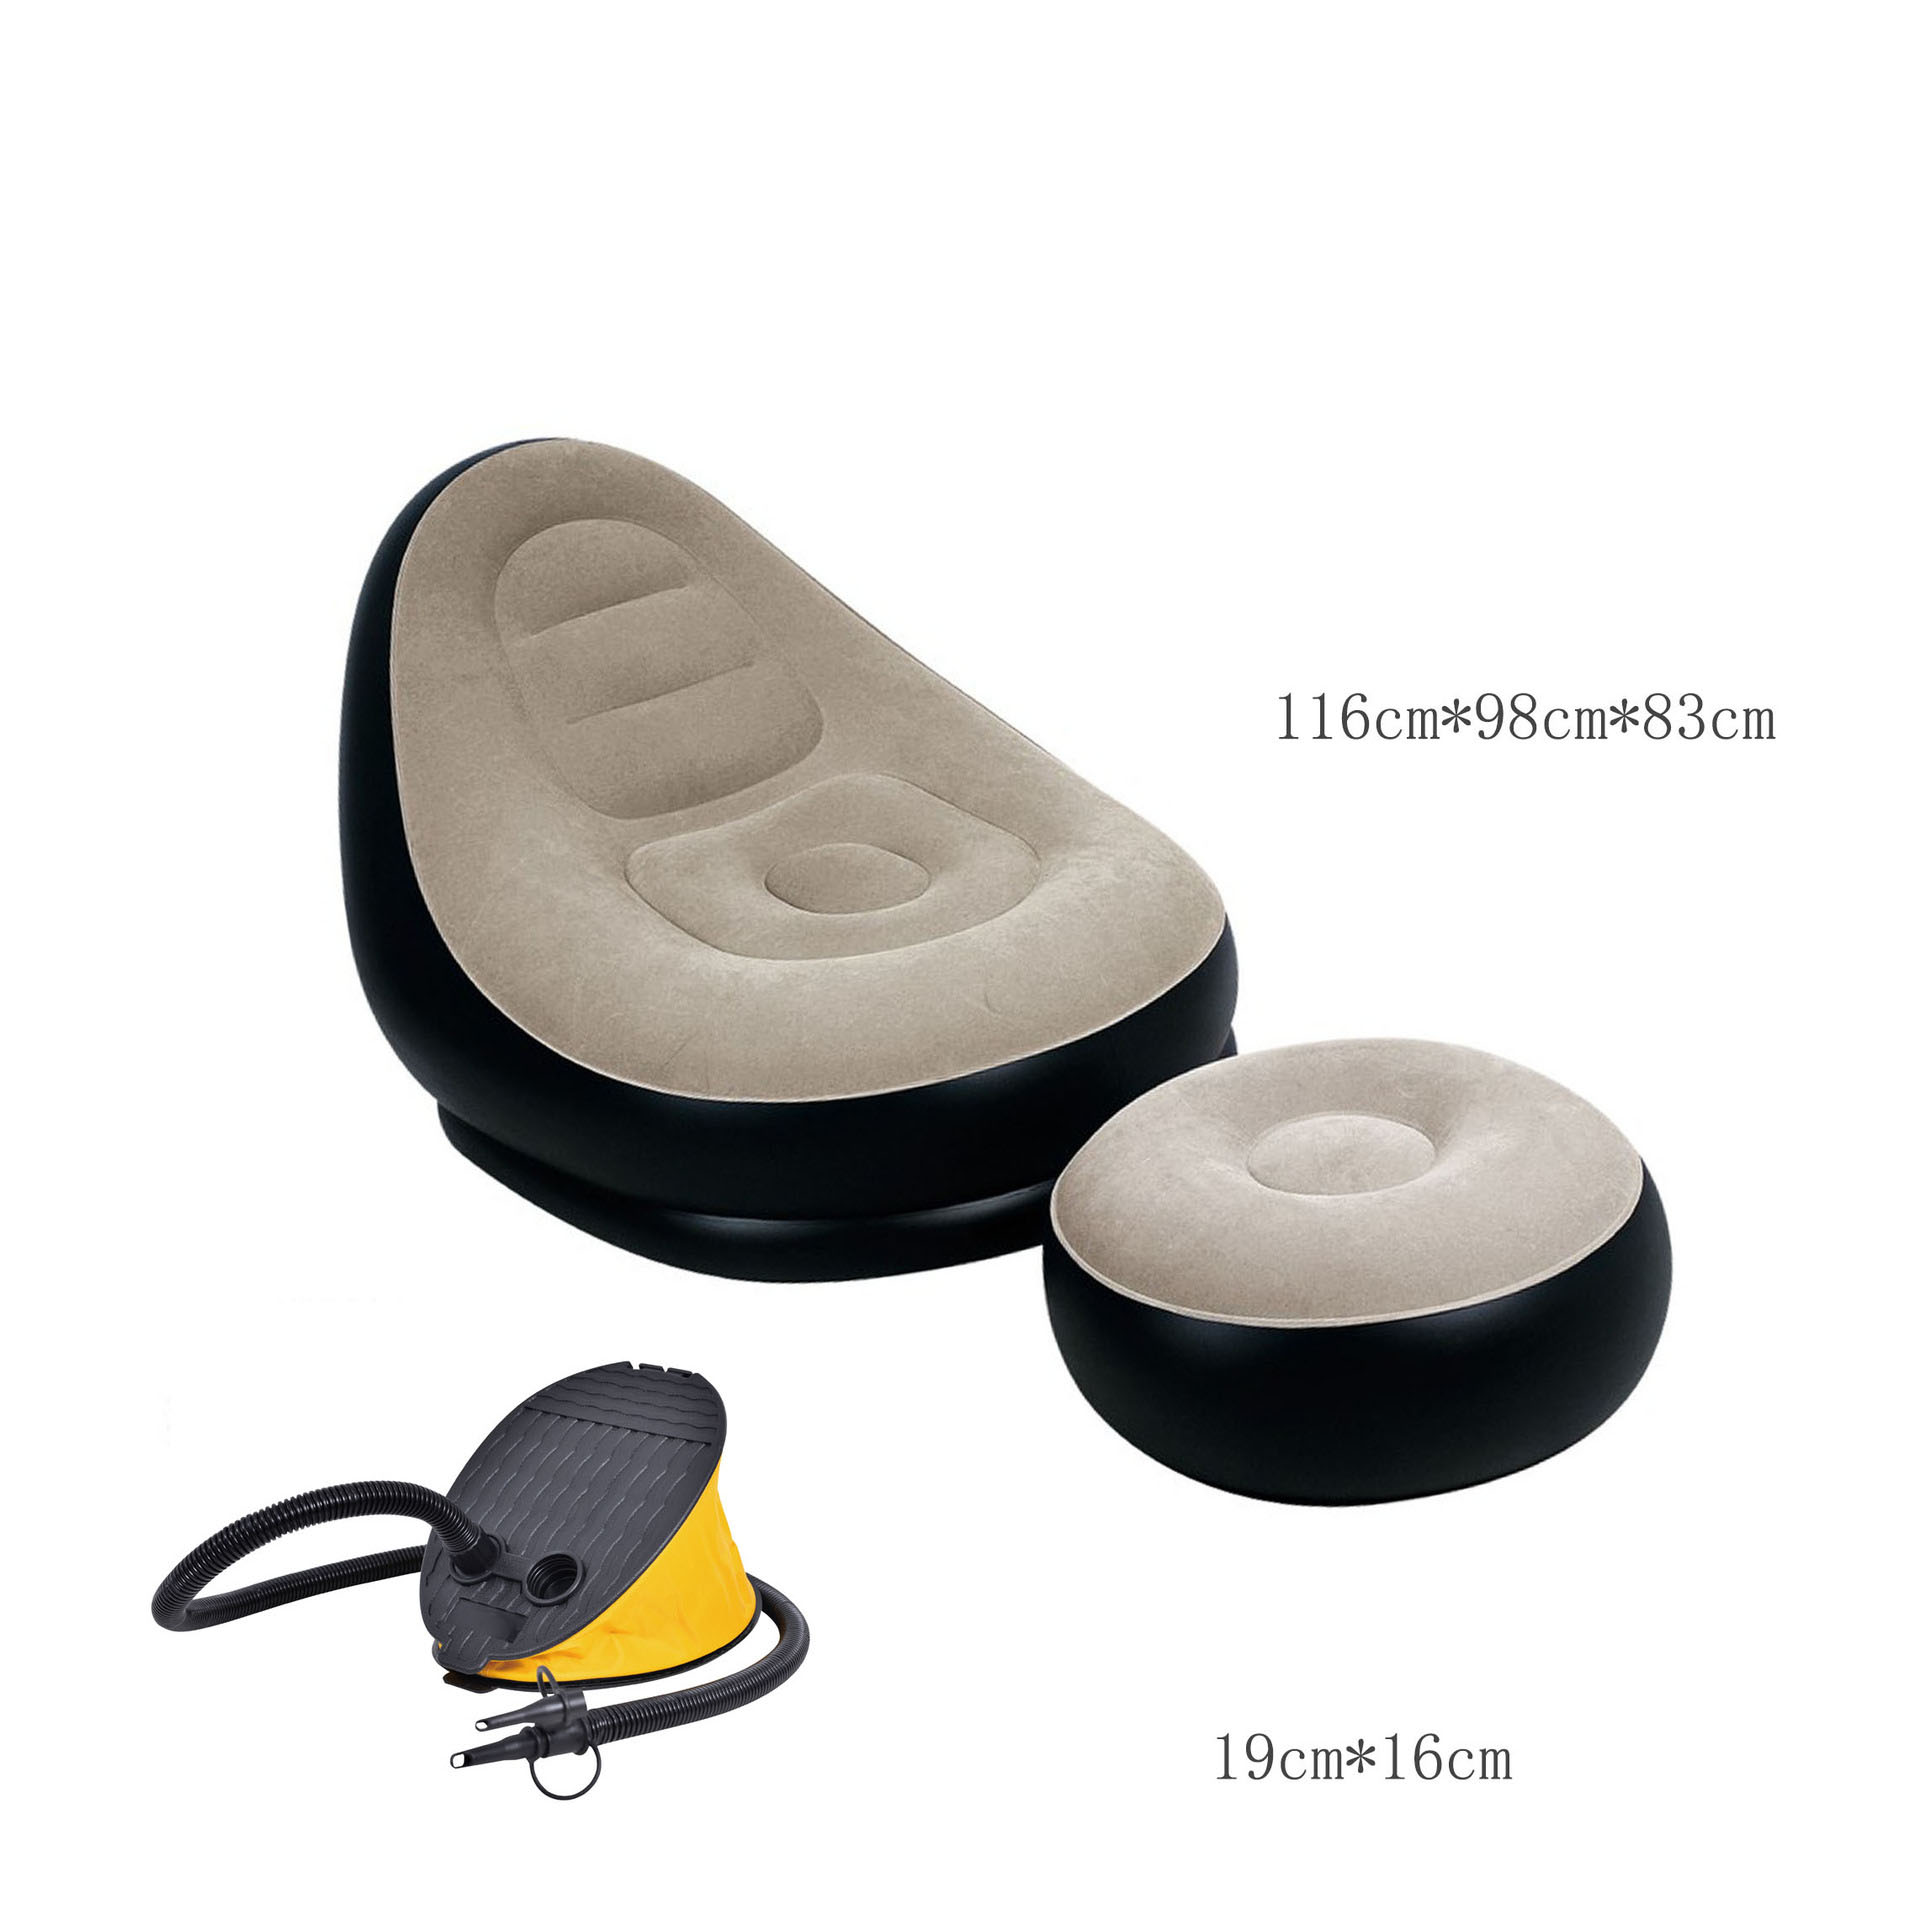 Luxury pedal sofa ( 116 * 98 * 83cm ) 27449 ( including pedal inflatable pump )